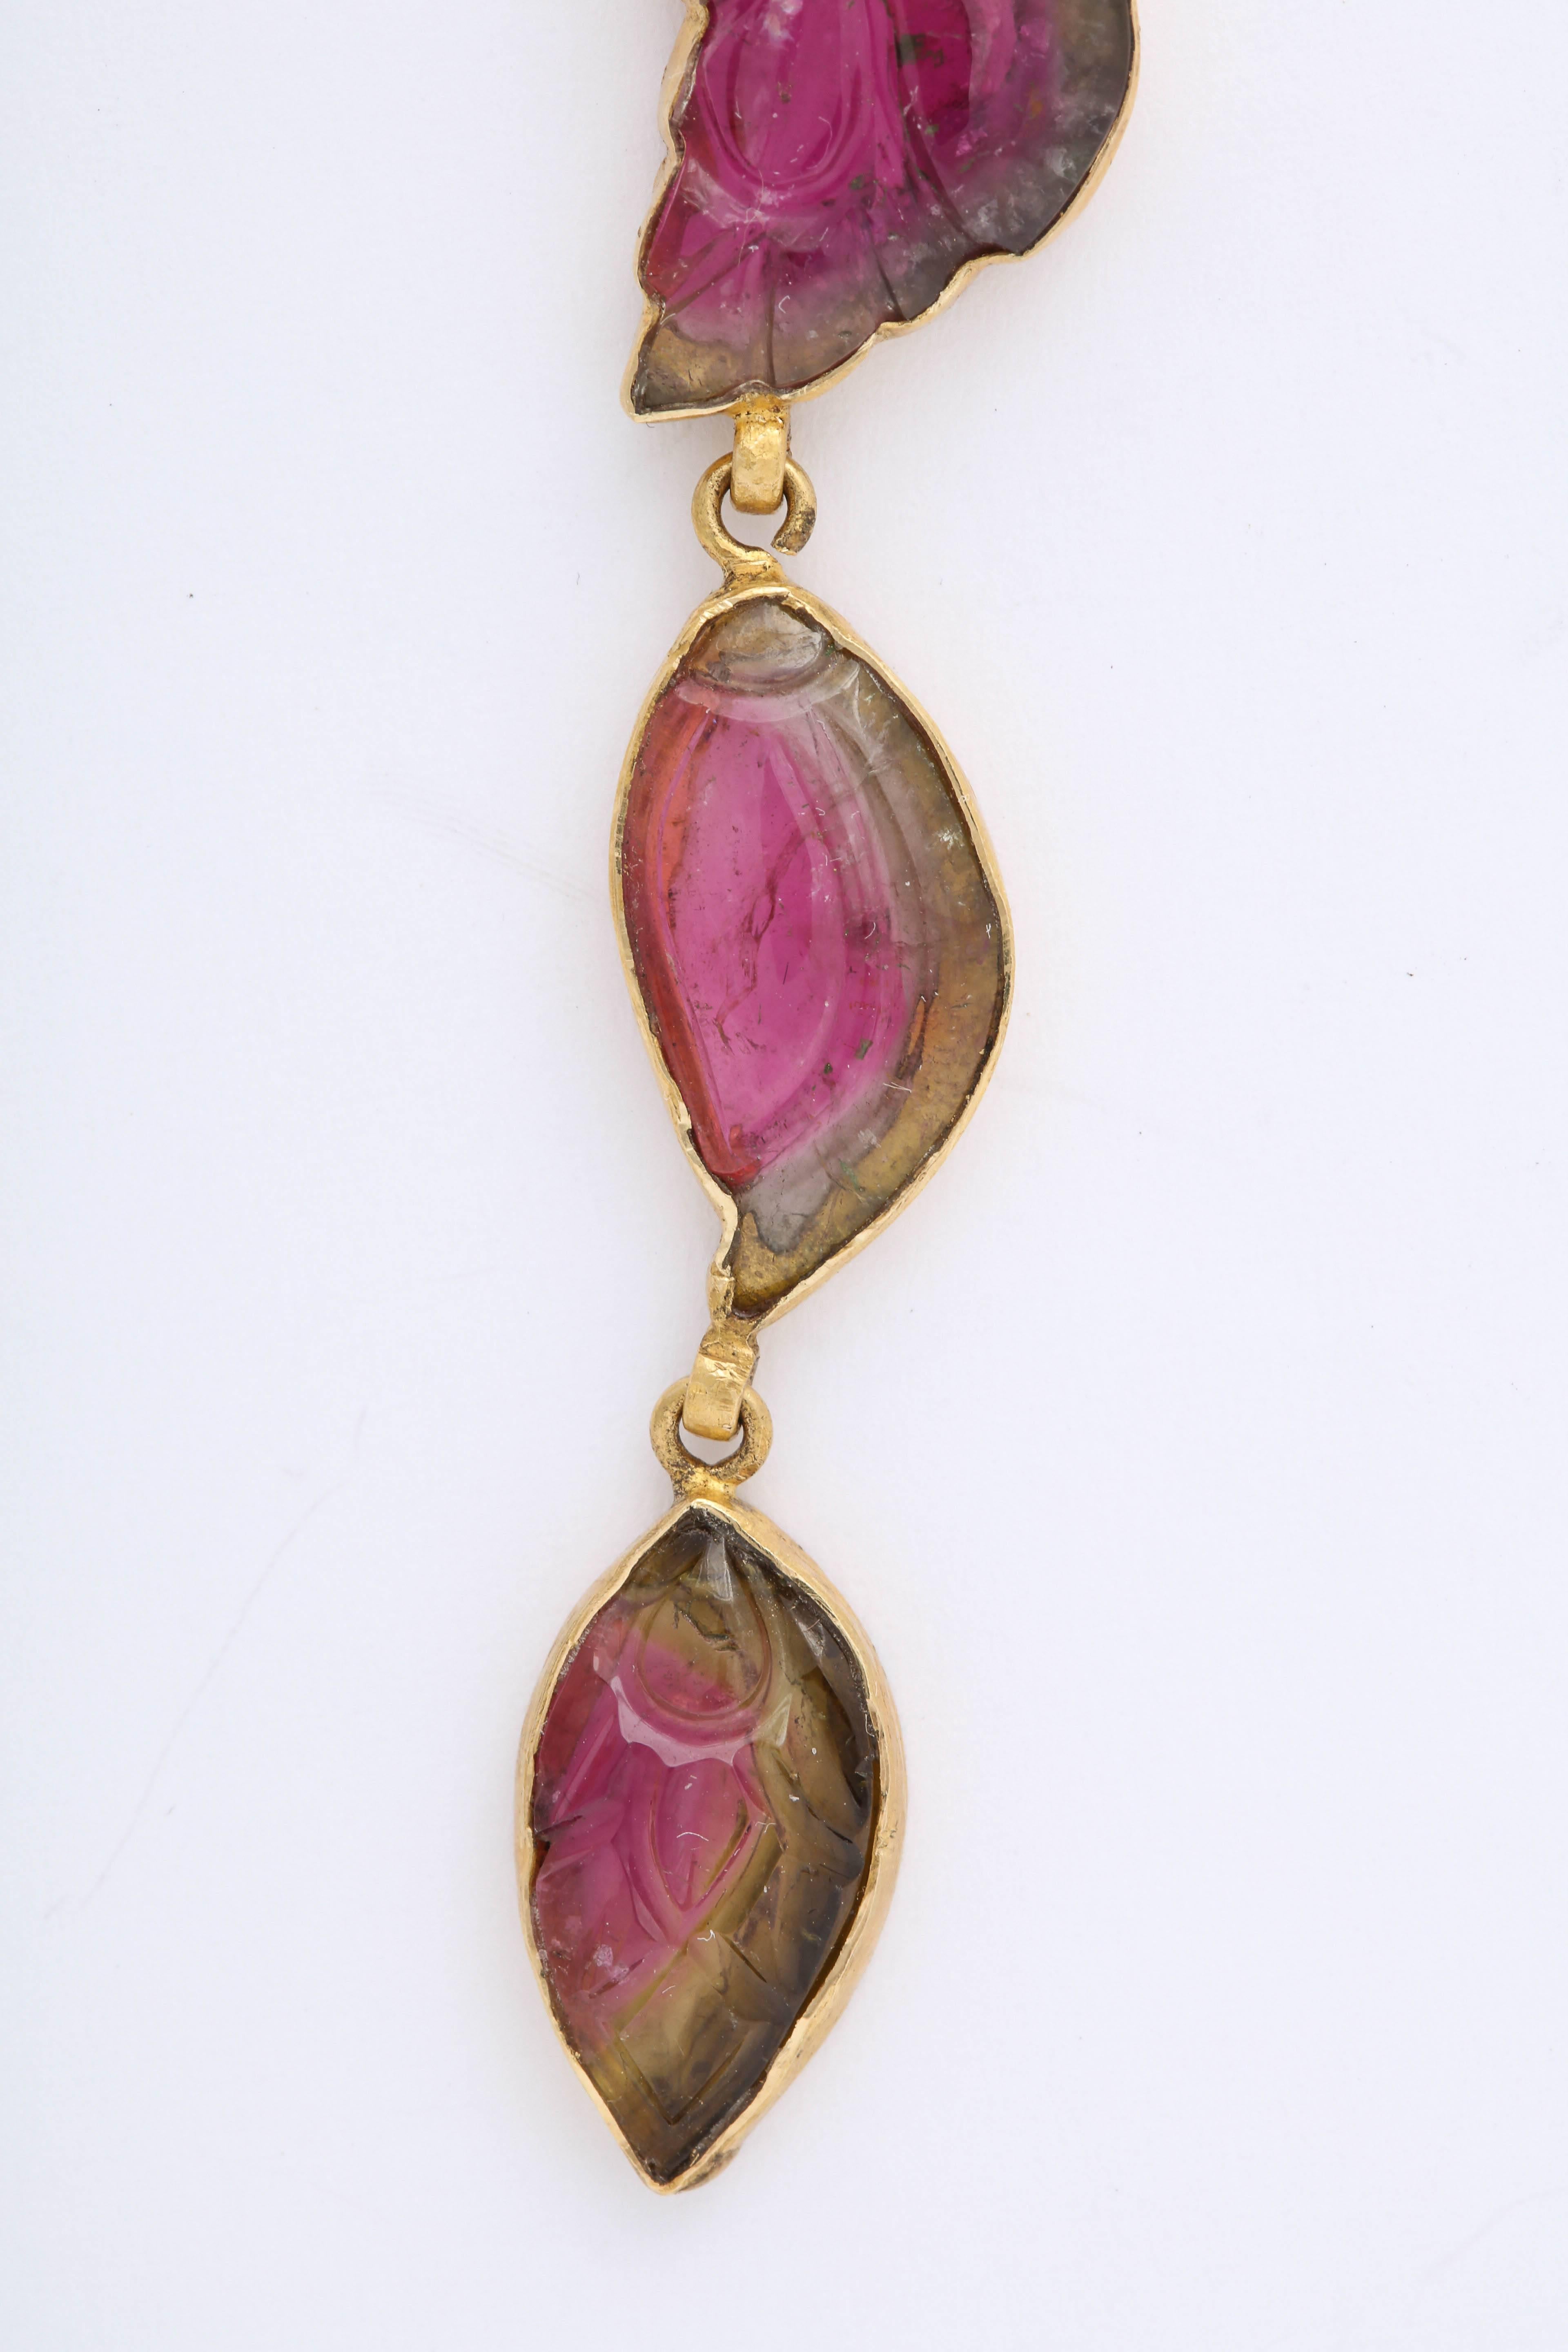 Rebecca Koven Gold Carved Watermelon Tourmaline Pendant Earrings In New Condition For Sale In Fifth Avenue, NY